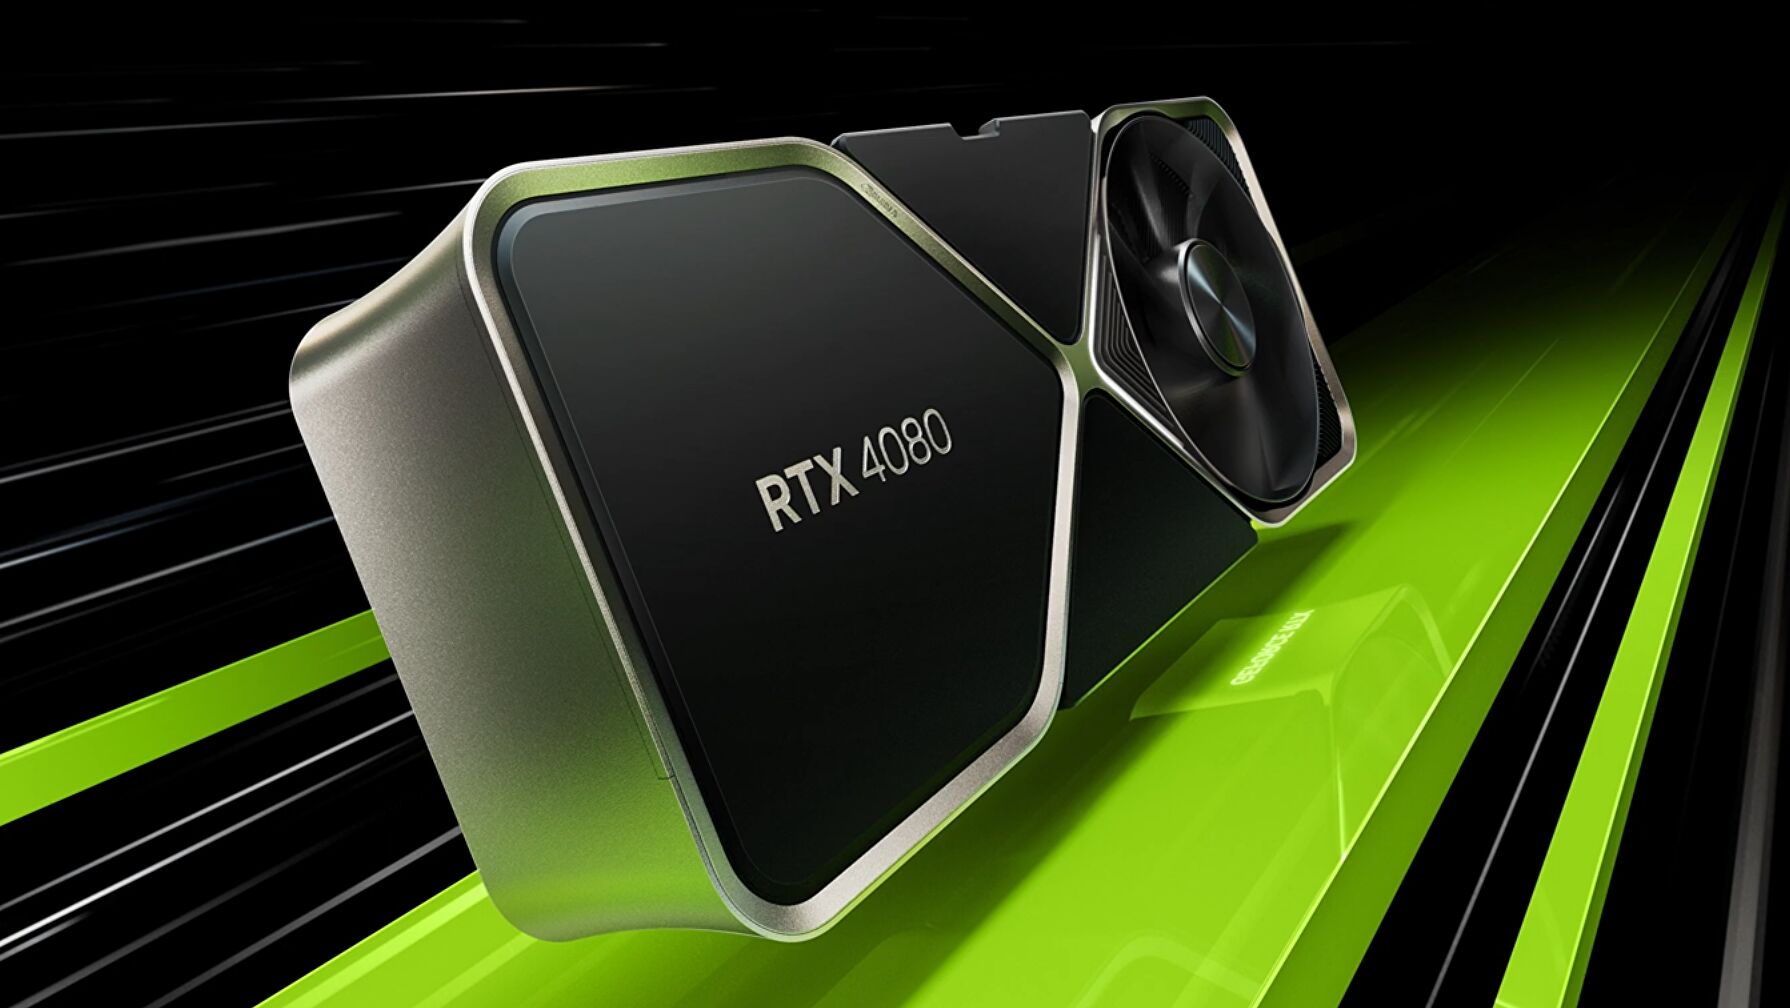 Nvidia “unlaunches” the RTX 4080 12GB, will allegedly pay partners’ rebranding costs